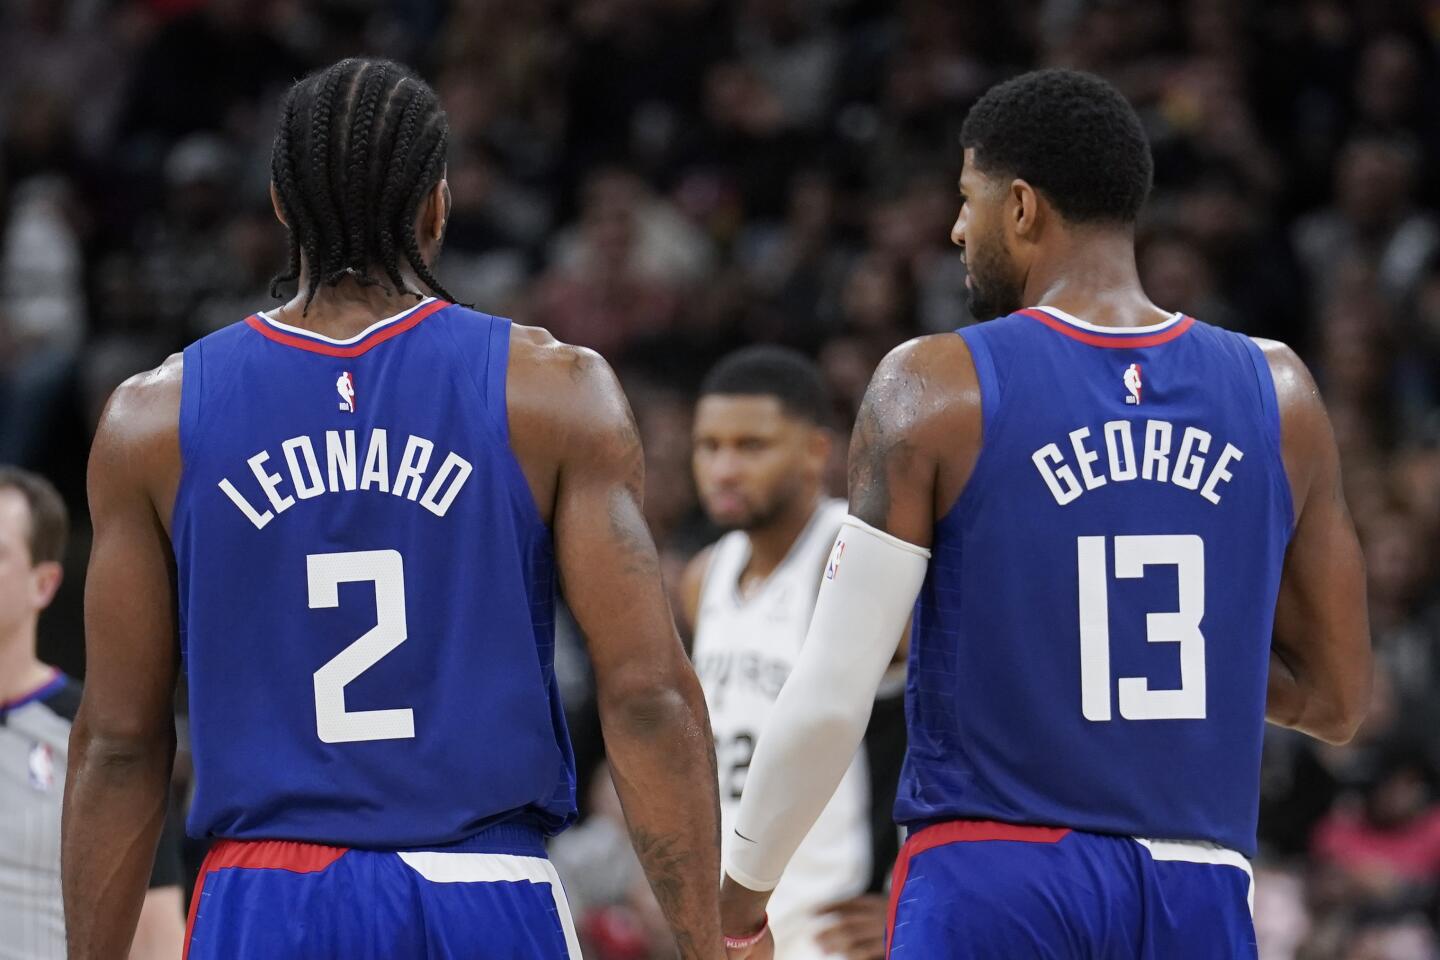 Clippers forwards Kawhi Leonard (2) and Paul George walk on the court during the second half of a game against the Spurs on Nov. 29.